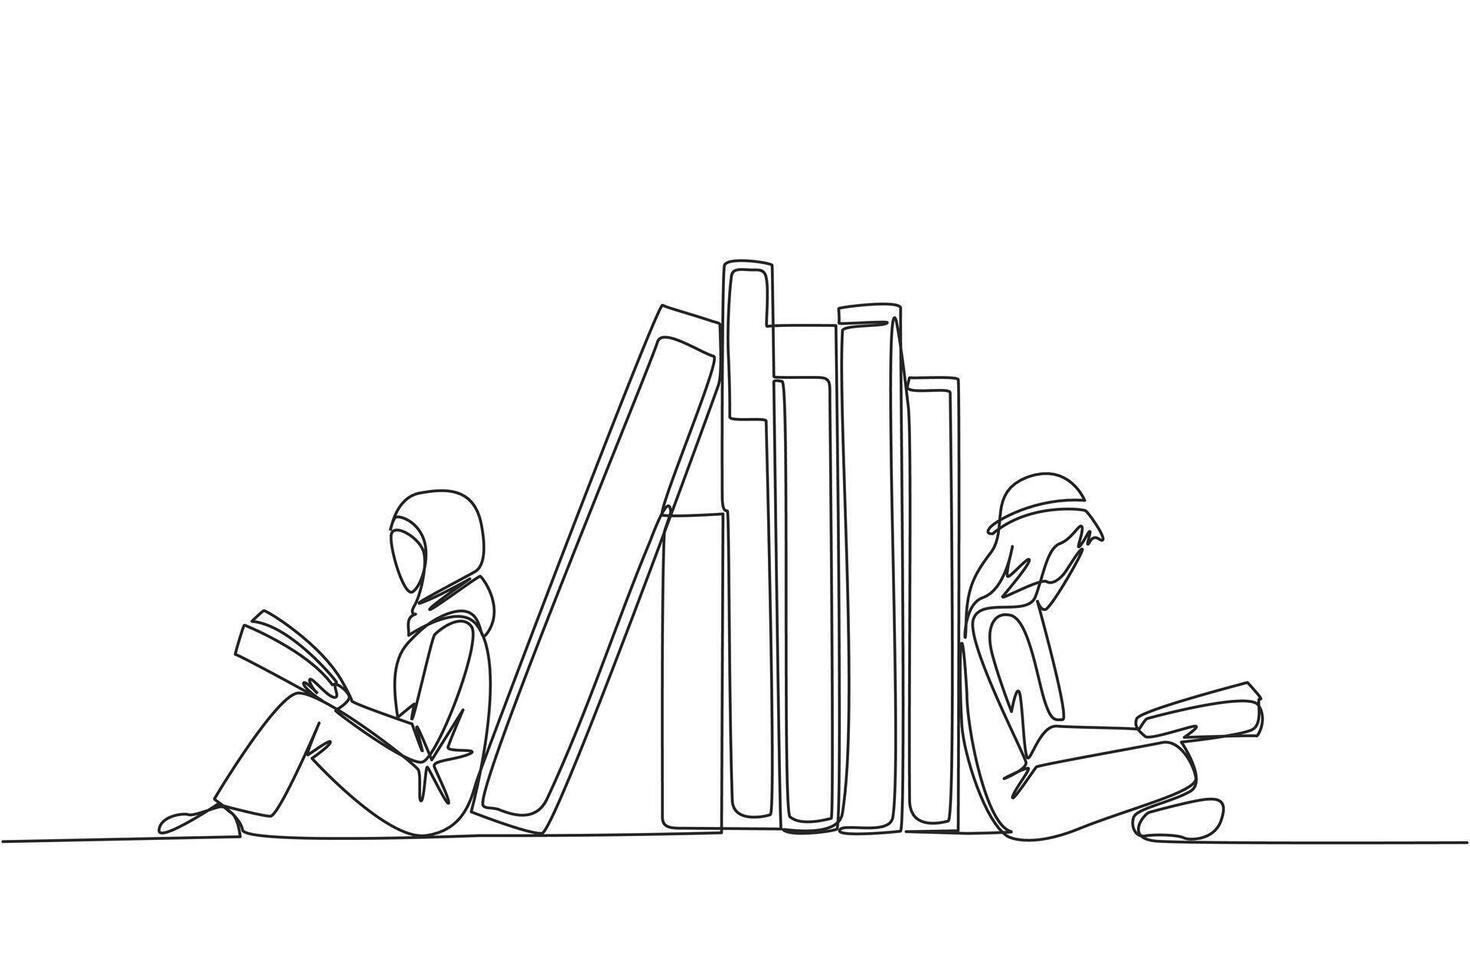 Continuous one line drawing Arab man woman reading sitting leaning against pile of books. Habit of reading book every day. Library. Book festival concept. Single line draw design illustration vector